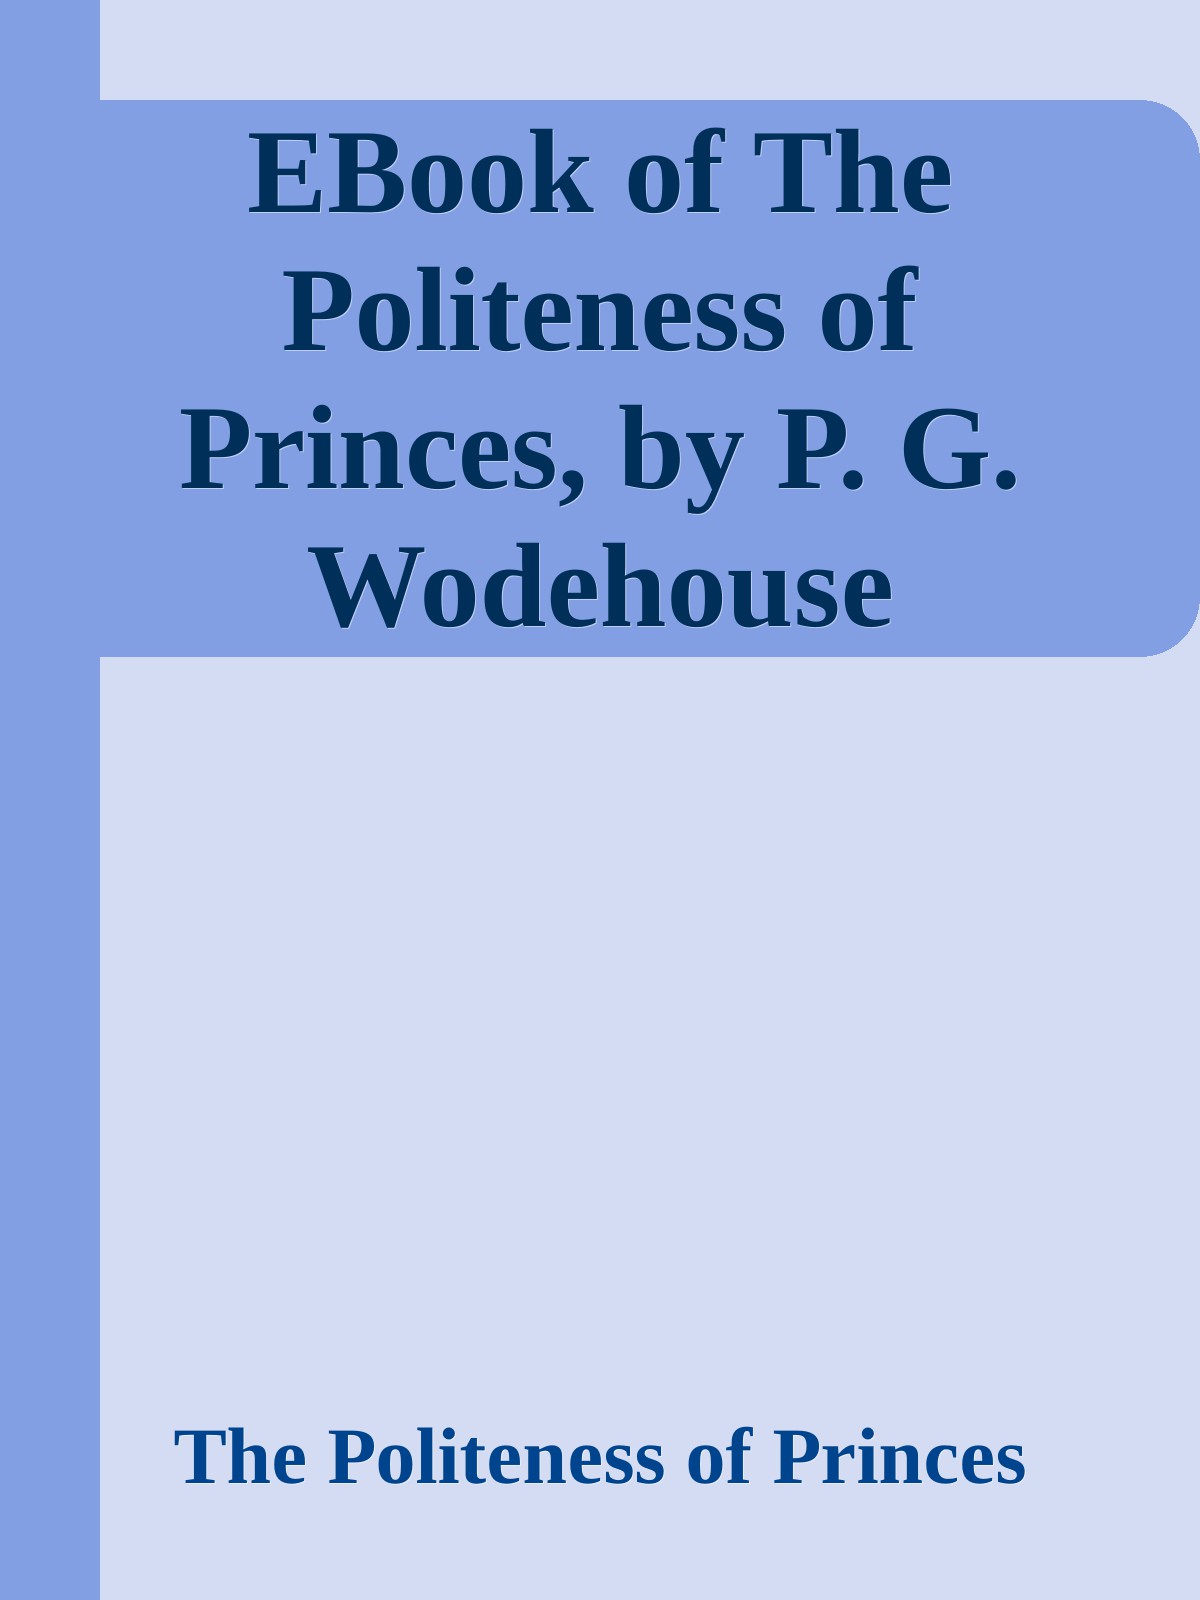 EBook of The Politeness of Princes, by P. G. Wodehouse